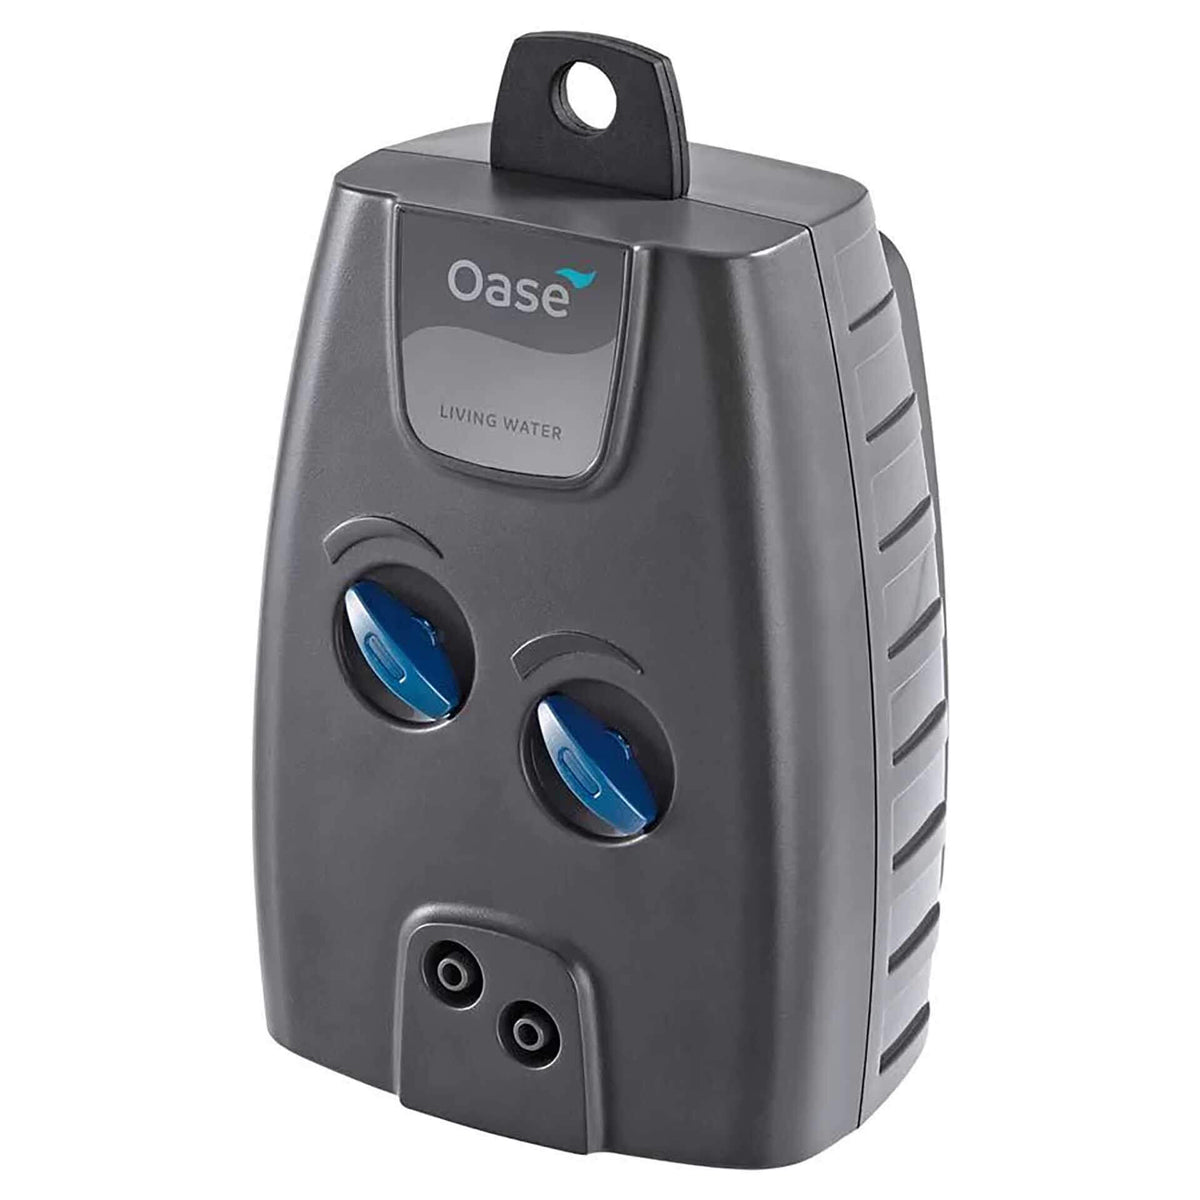 Oase Oxymax 400 Air Pump - Dual Outlet